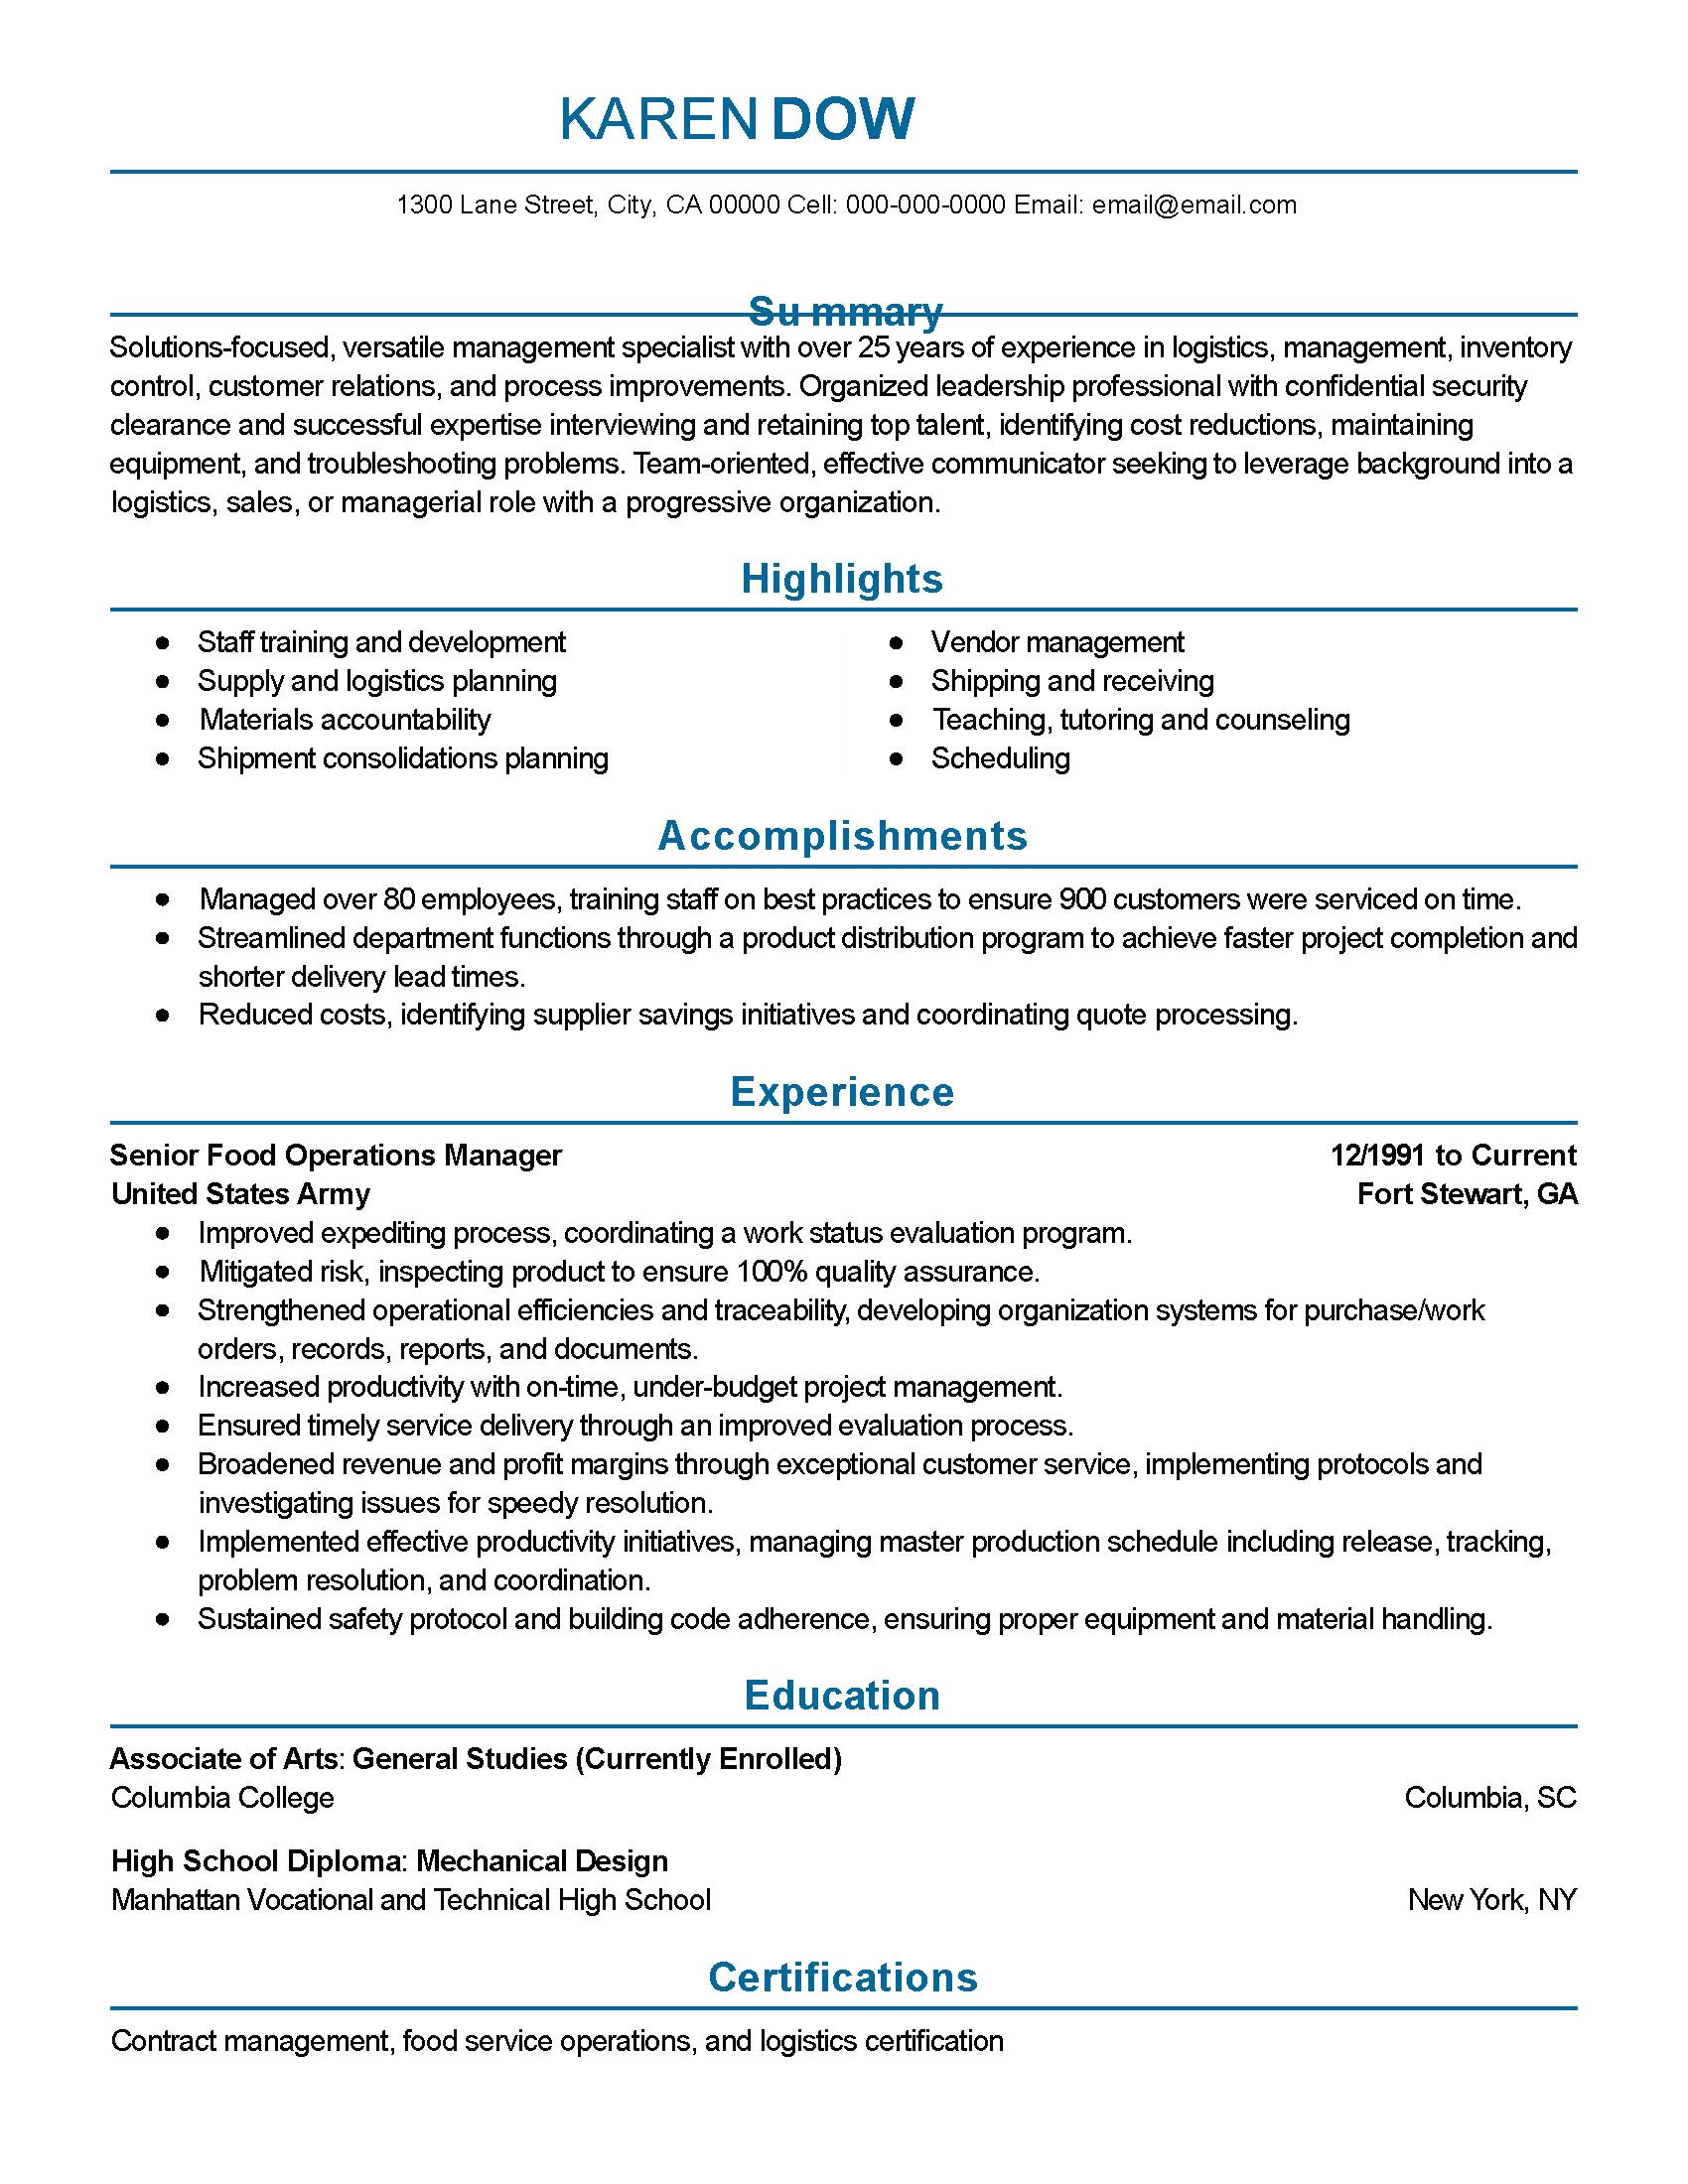 oil and gas electrical engineer resume sample lovely professional senior electrical engineer templates to showcase your